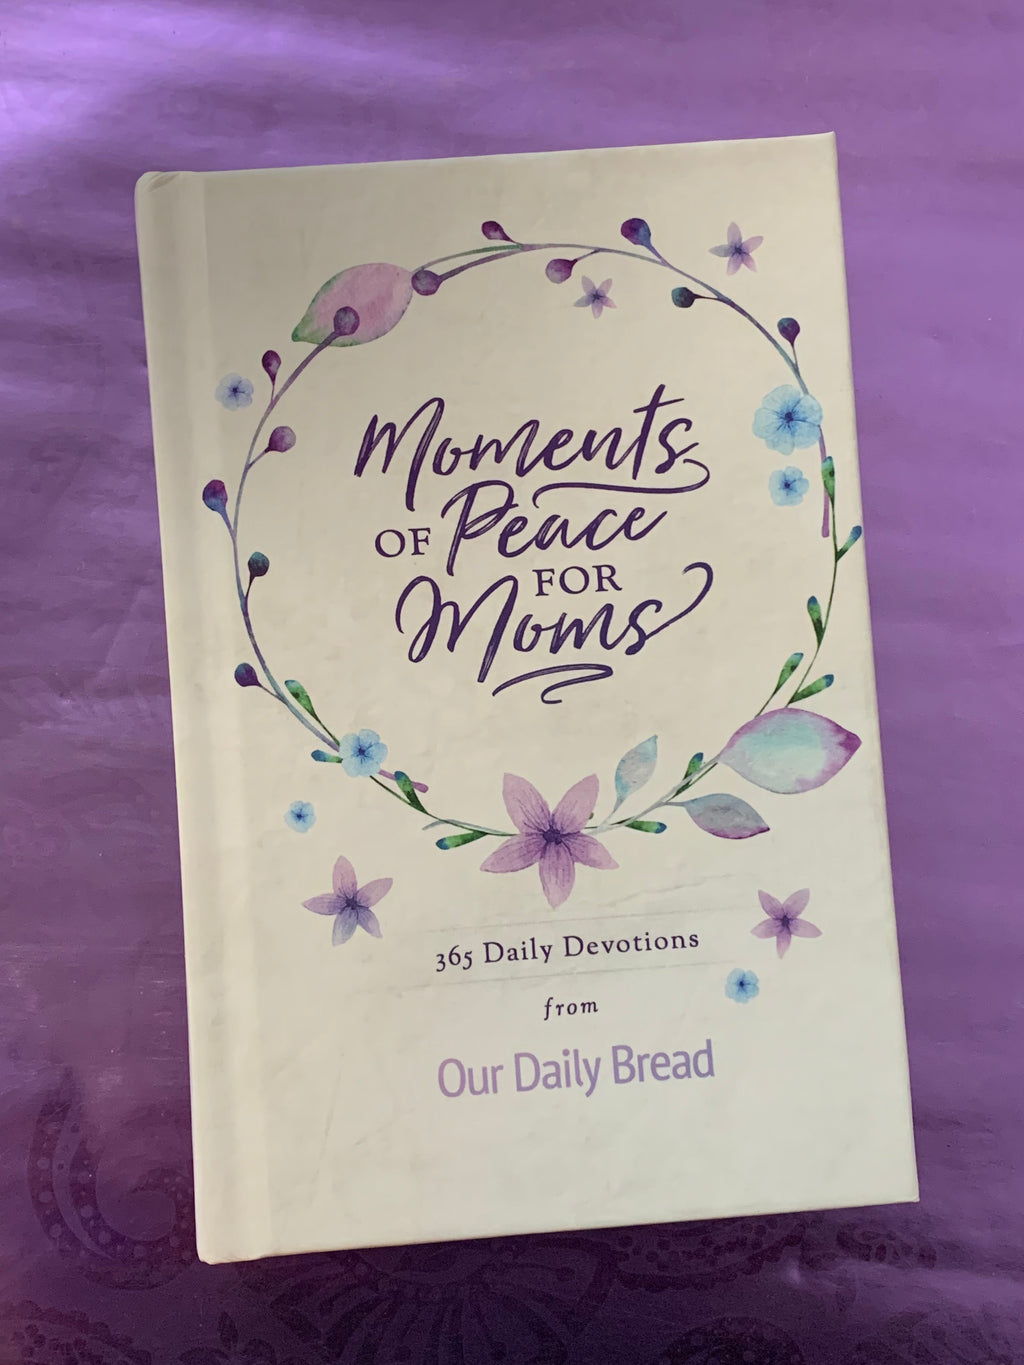 Moments of Peace for Moms: 365 Daily Devotions from Our Daily Bread